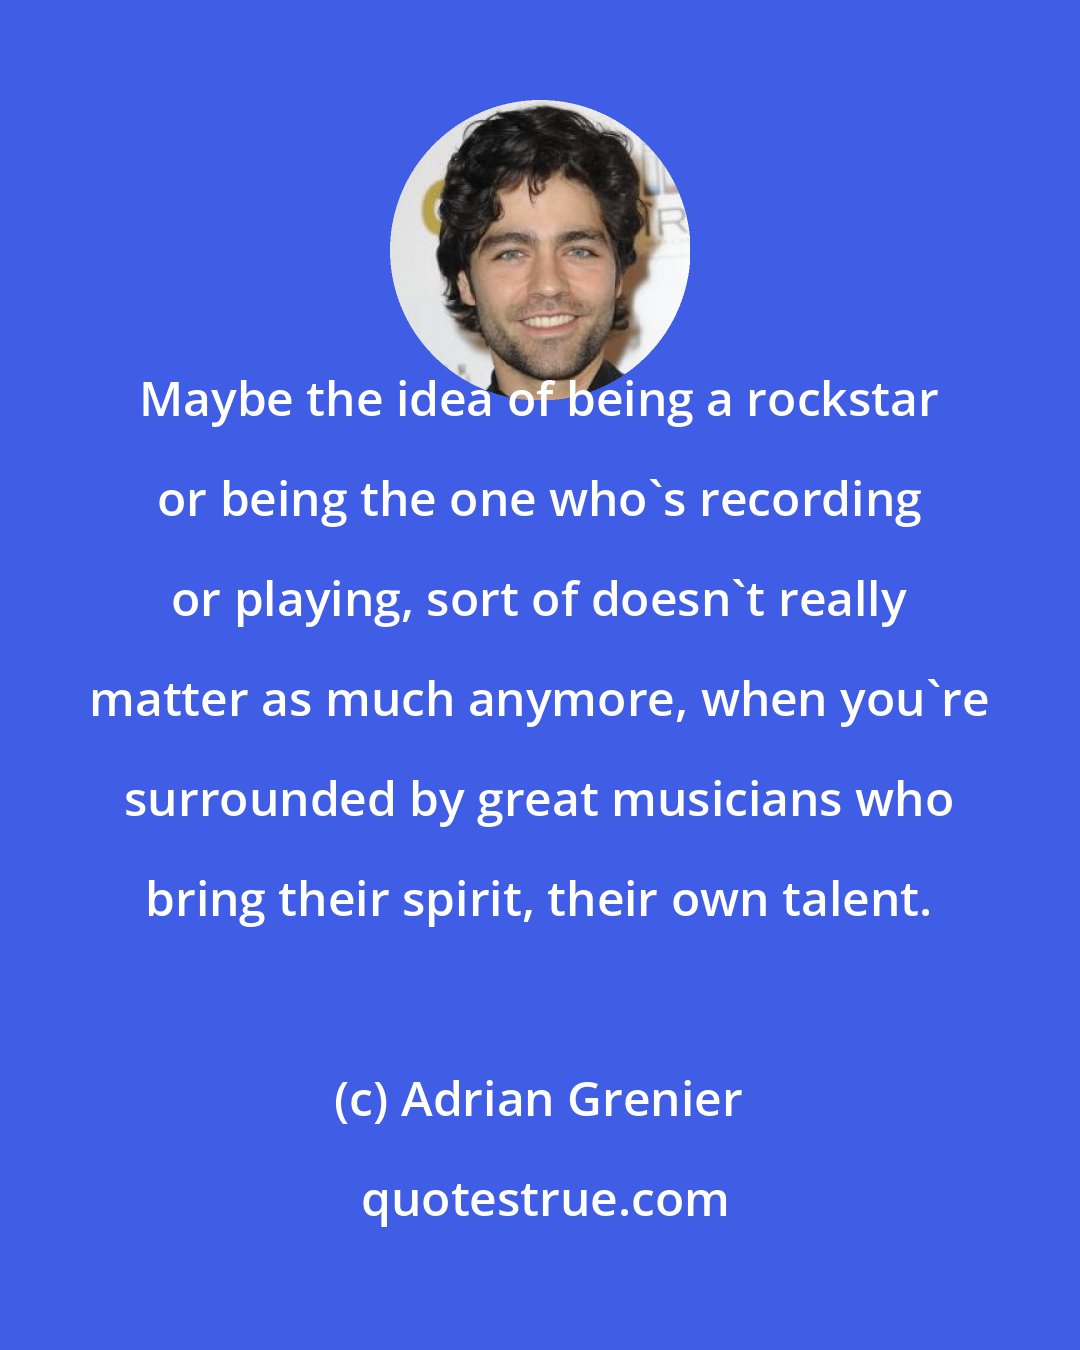 Adrian Grenier: Maybe the idea of being a rockstar or being the one who's recording or playing, sort of doesn't really matter as much anymore, when you're surrounded by great musicians who bring their spirit, their own talent.